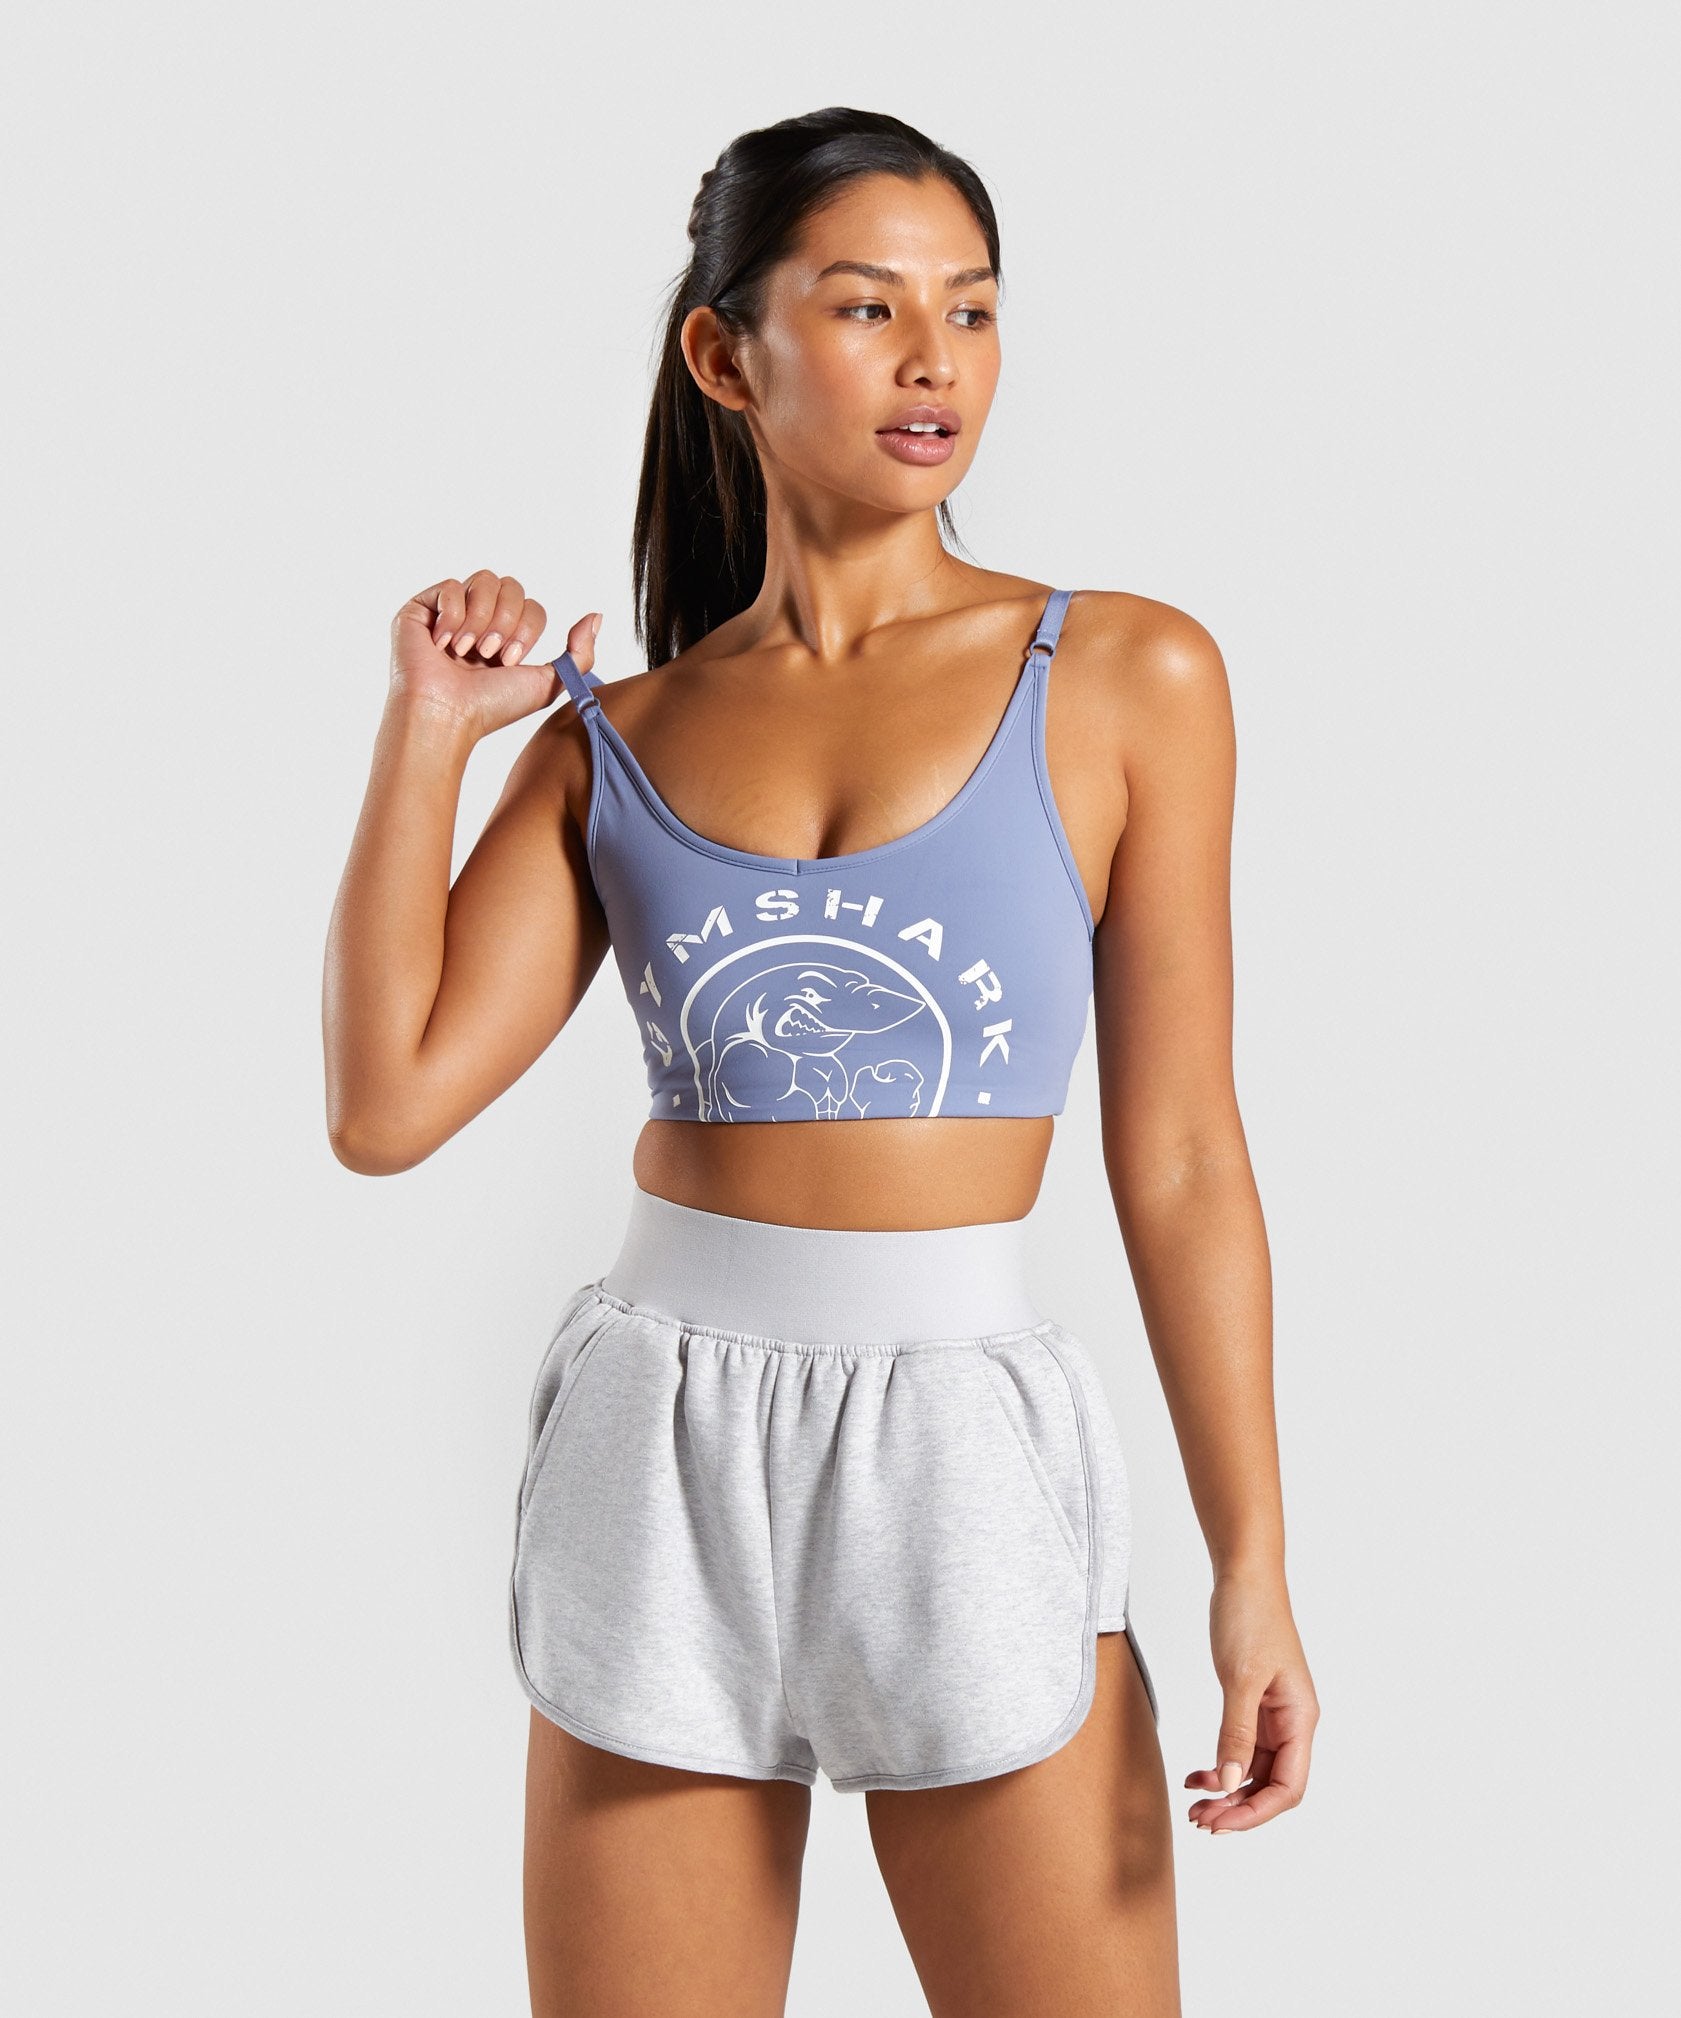 GYMSHARK Sports Bra and Shorts for Medium sizes review 